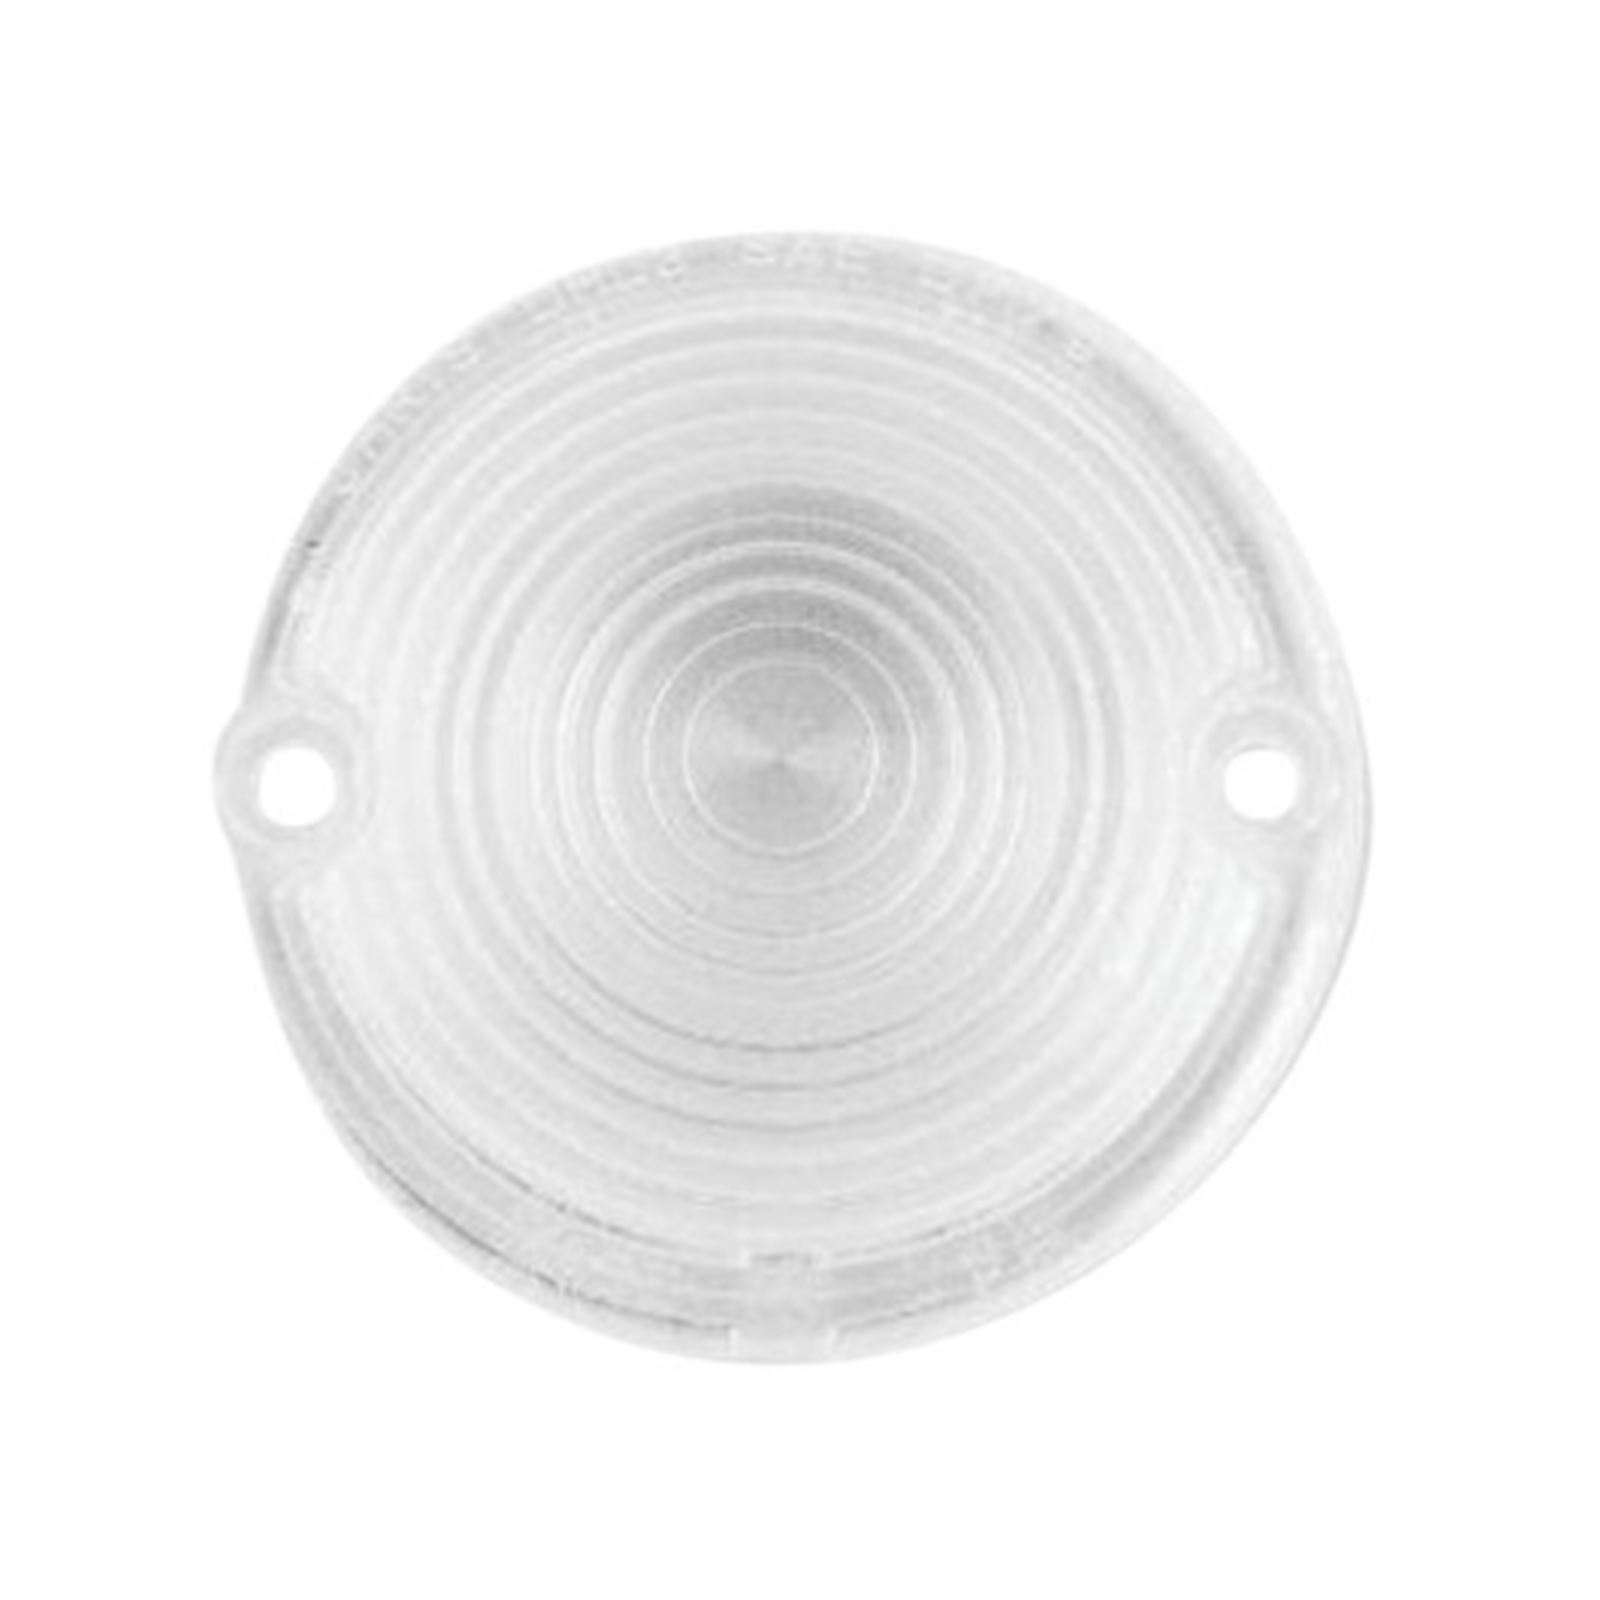 Letric Lighting Co. 3" Flat Style Lens - Front or Rear, Clear